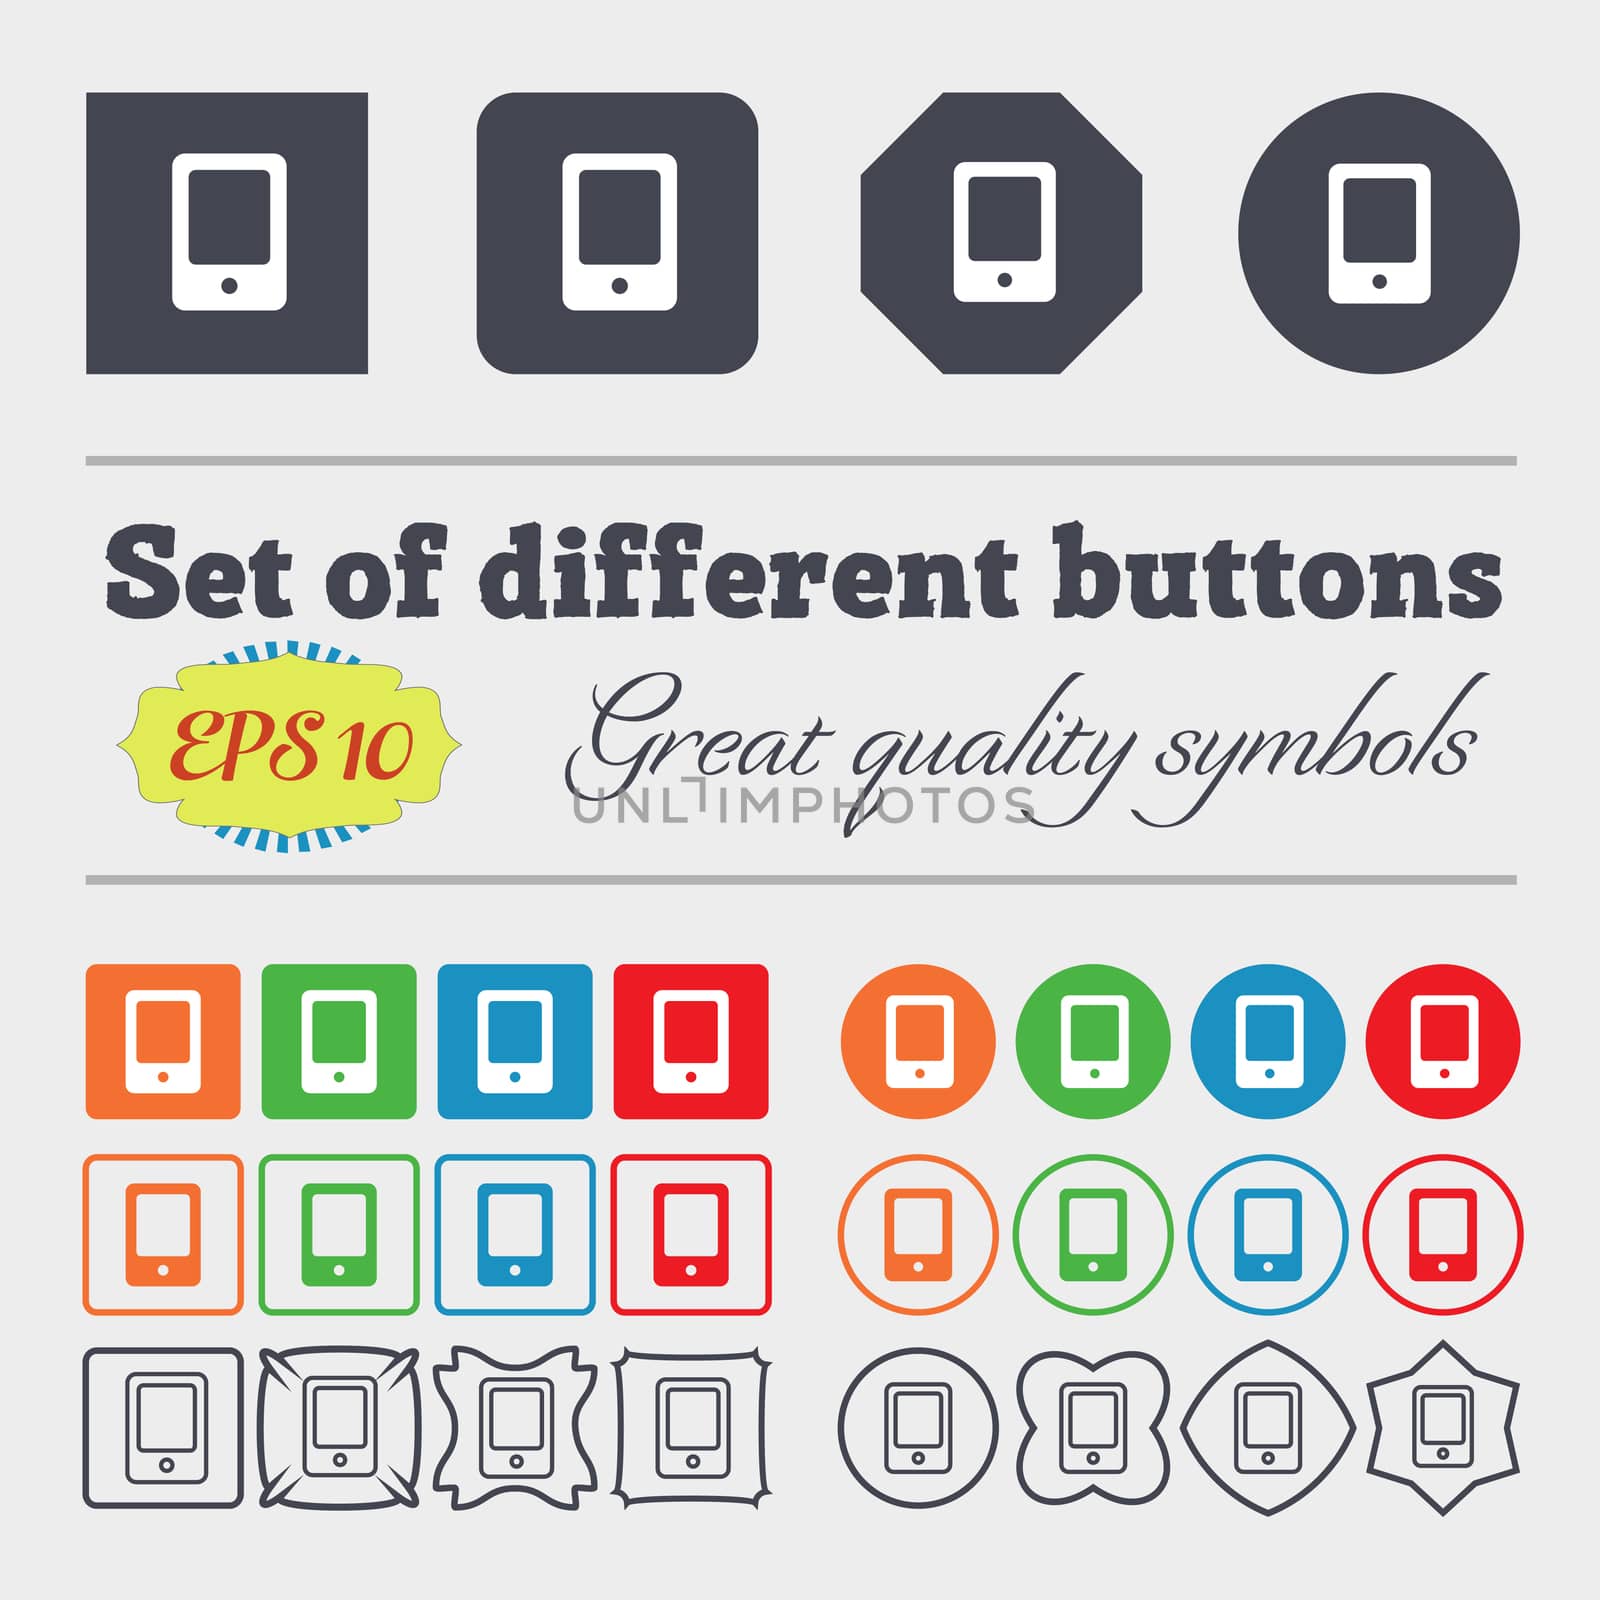 Tablet icon sign. Big set of colorful, diverse, high-quality buttons. illustration